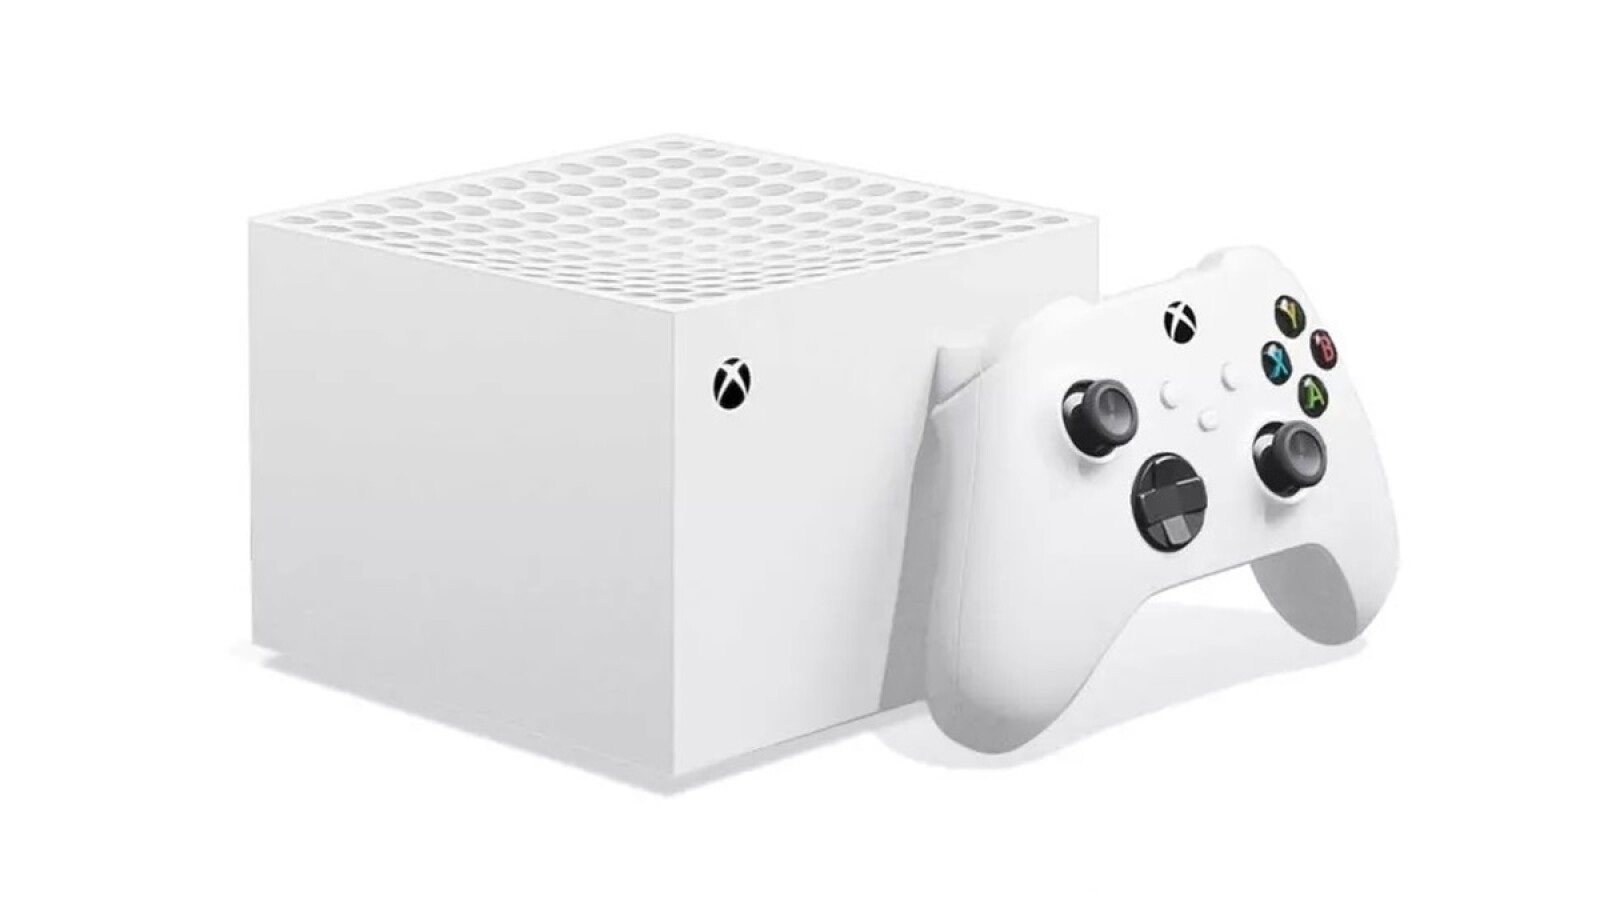 Xbox Keystone is the "new Xbox".  We know the details of the device and its price